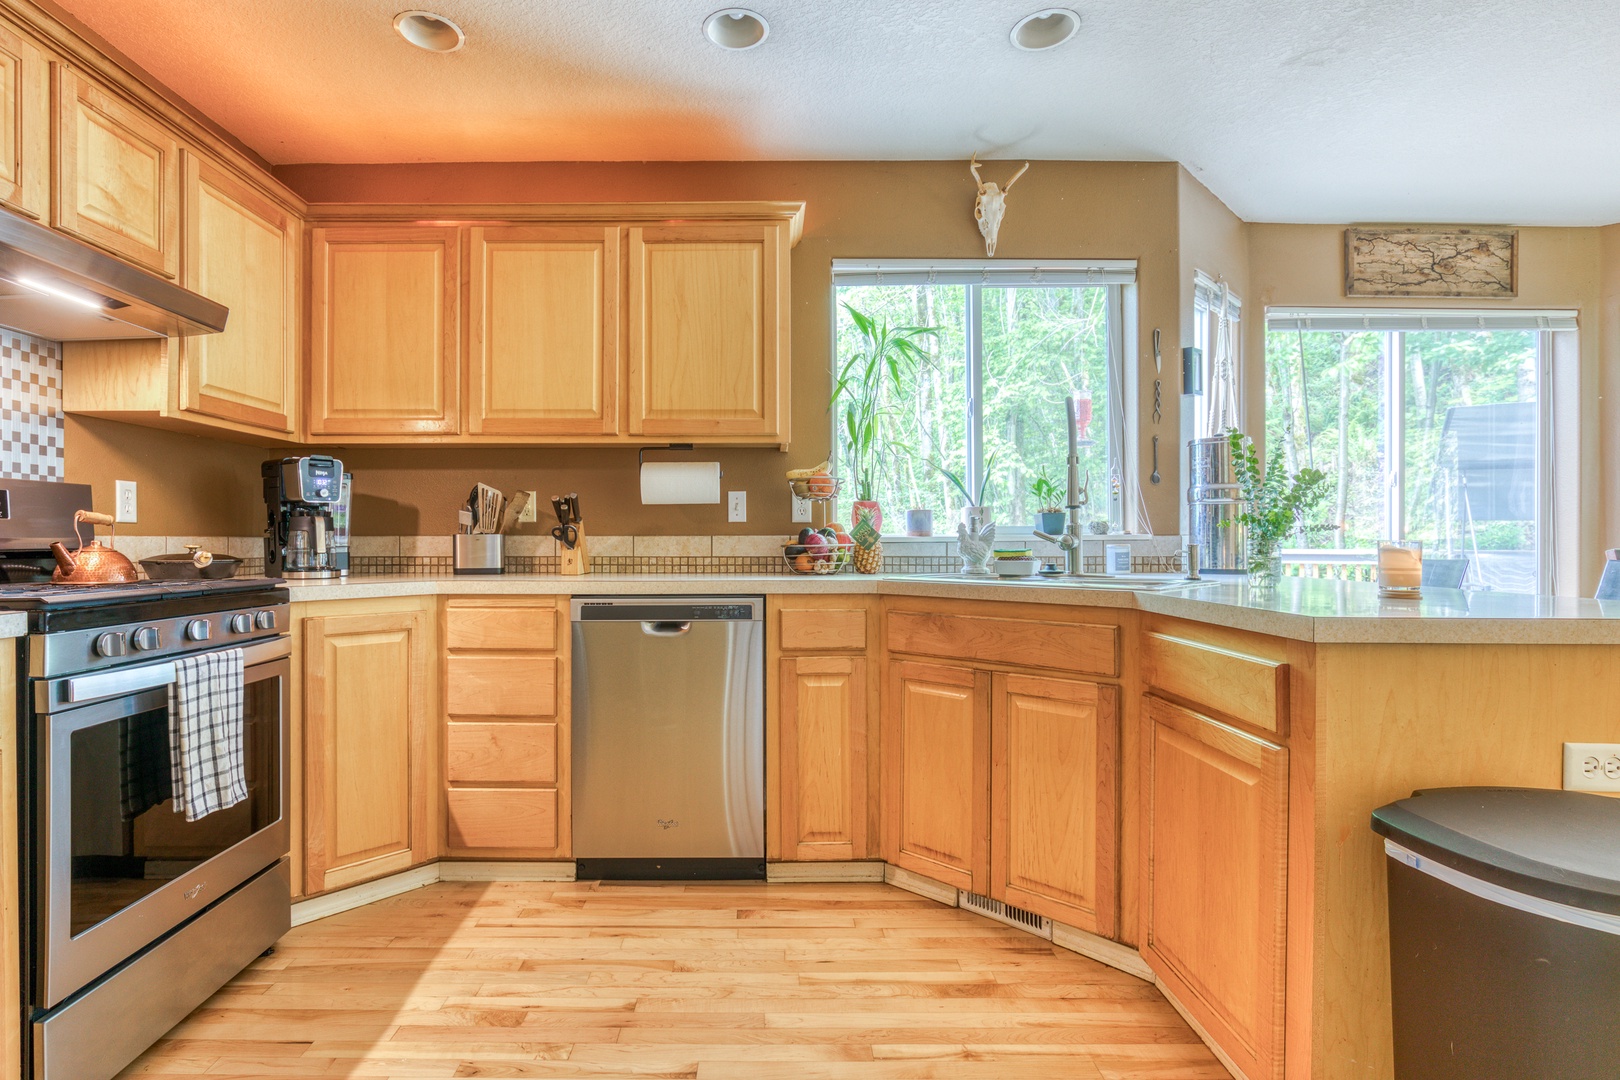 Clackamas Vacation Rentals, Duck Crossing - Equipped with a dishwasher for your convenience